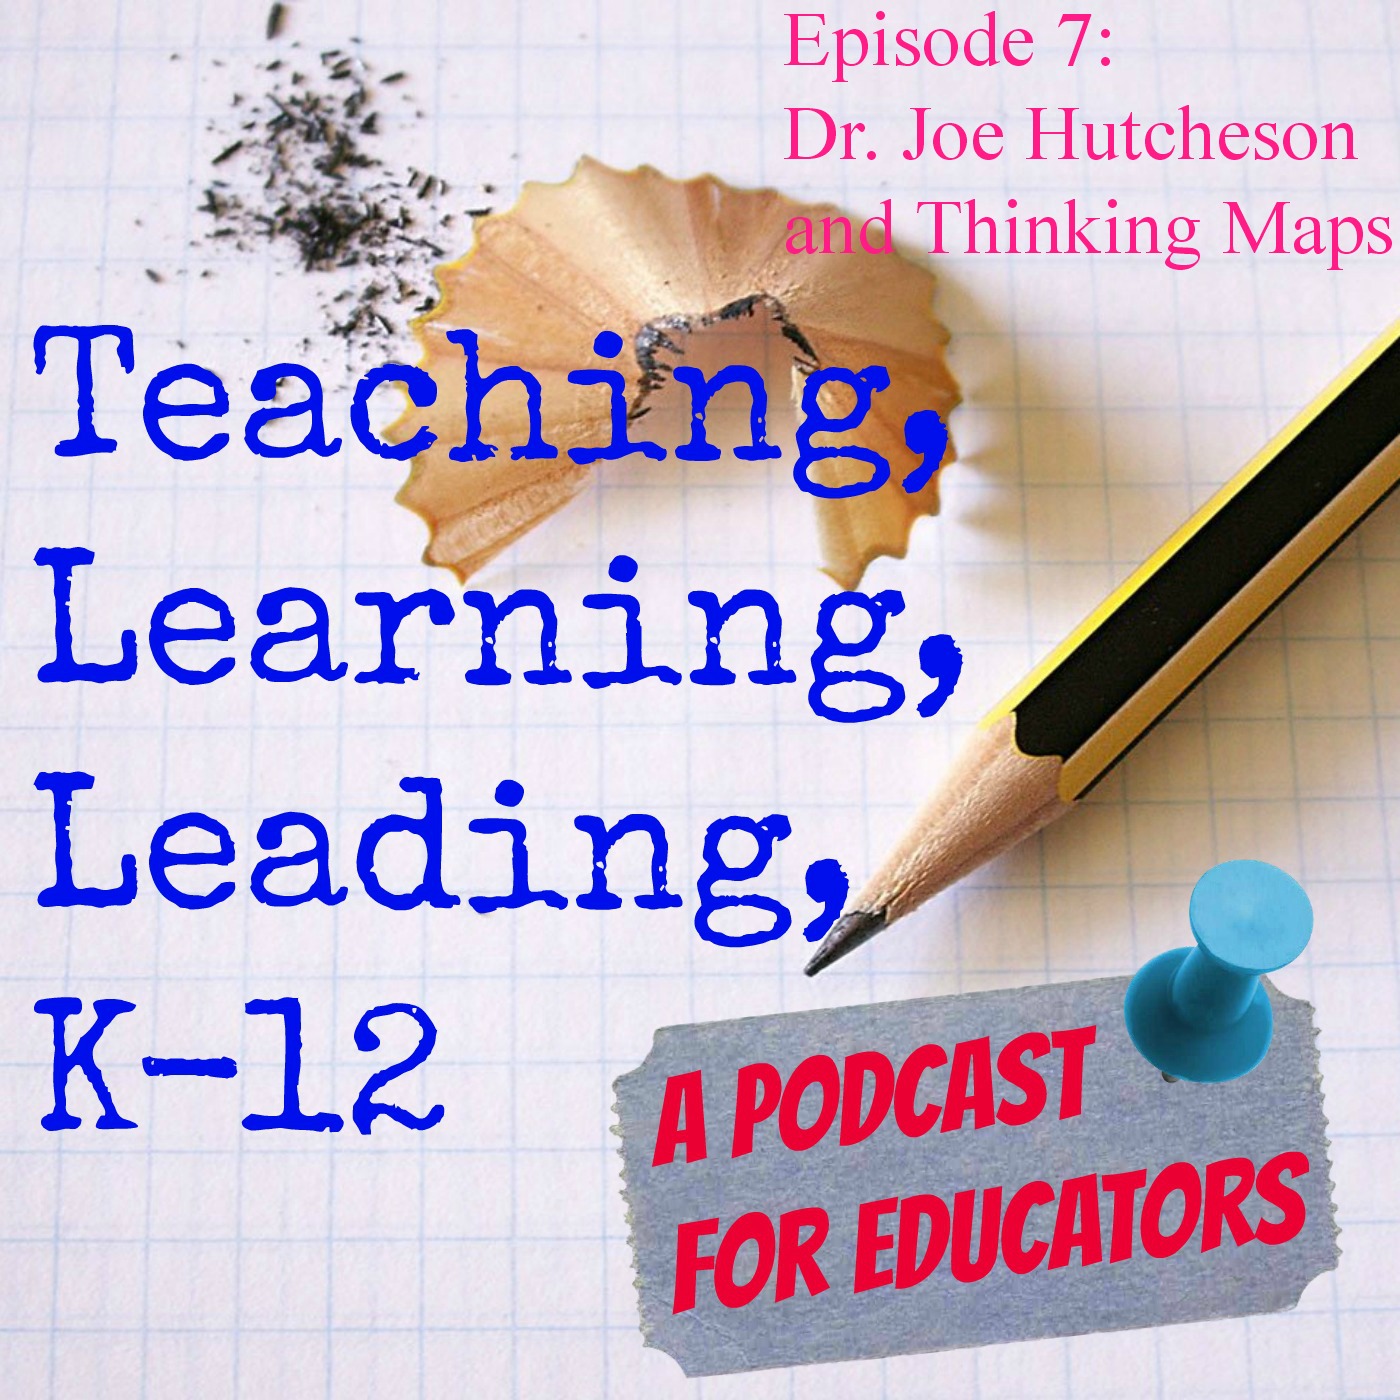 Episode 7: Dr. Joe Hutcheson and Thinking Maps